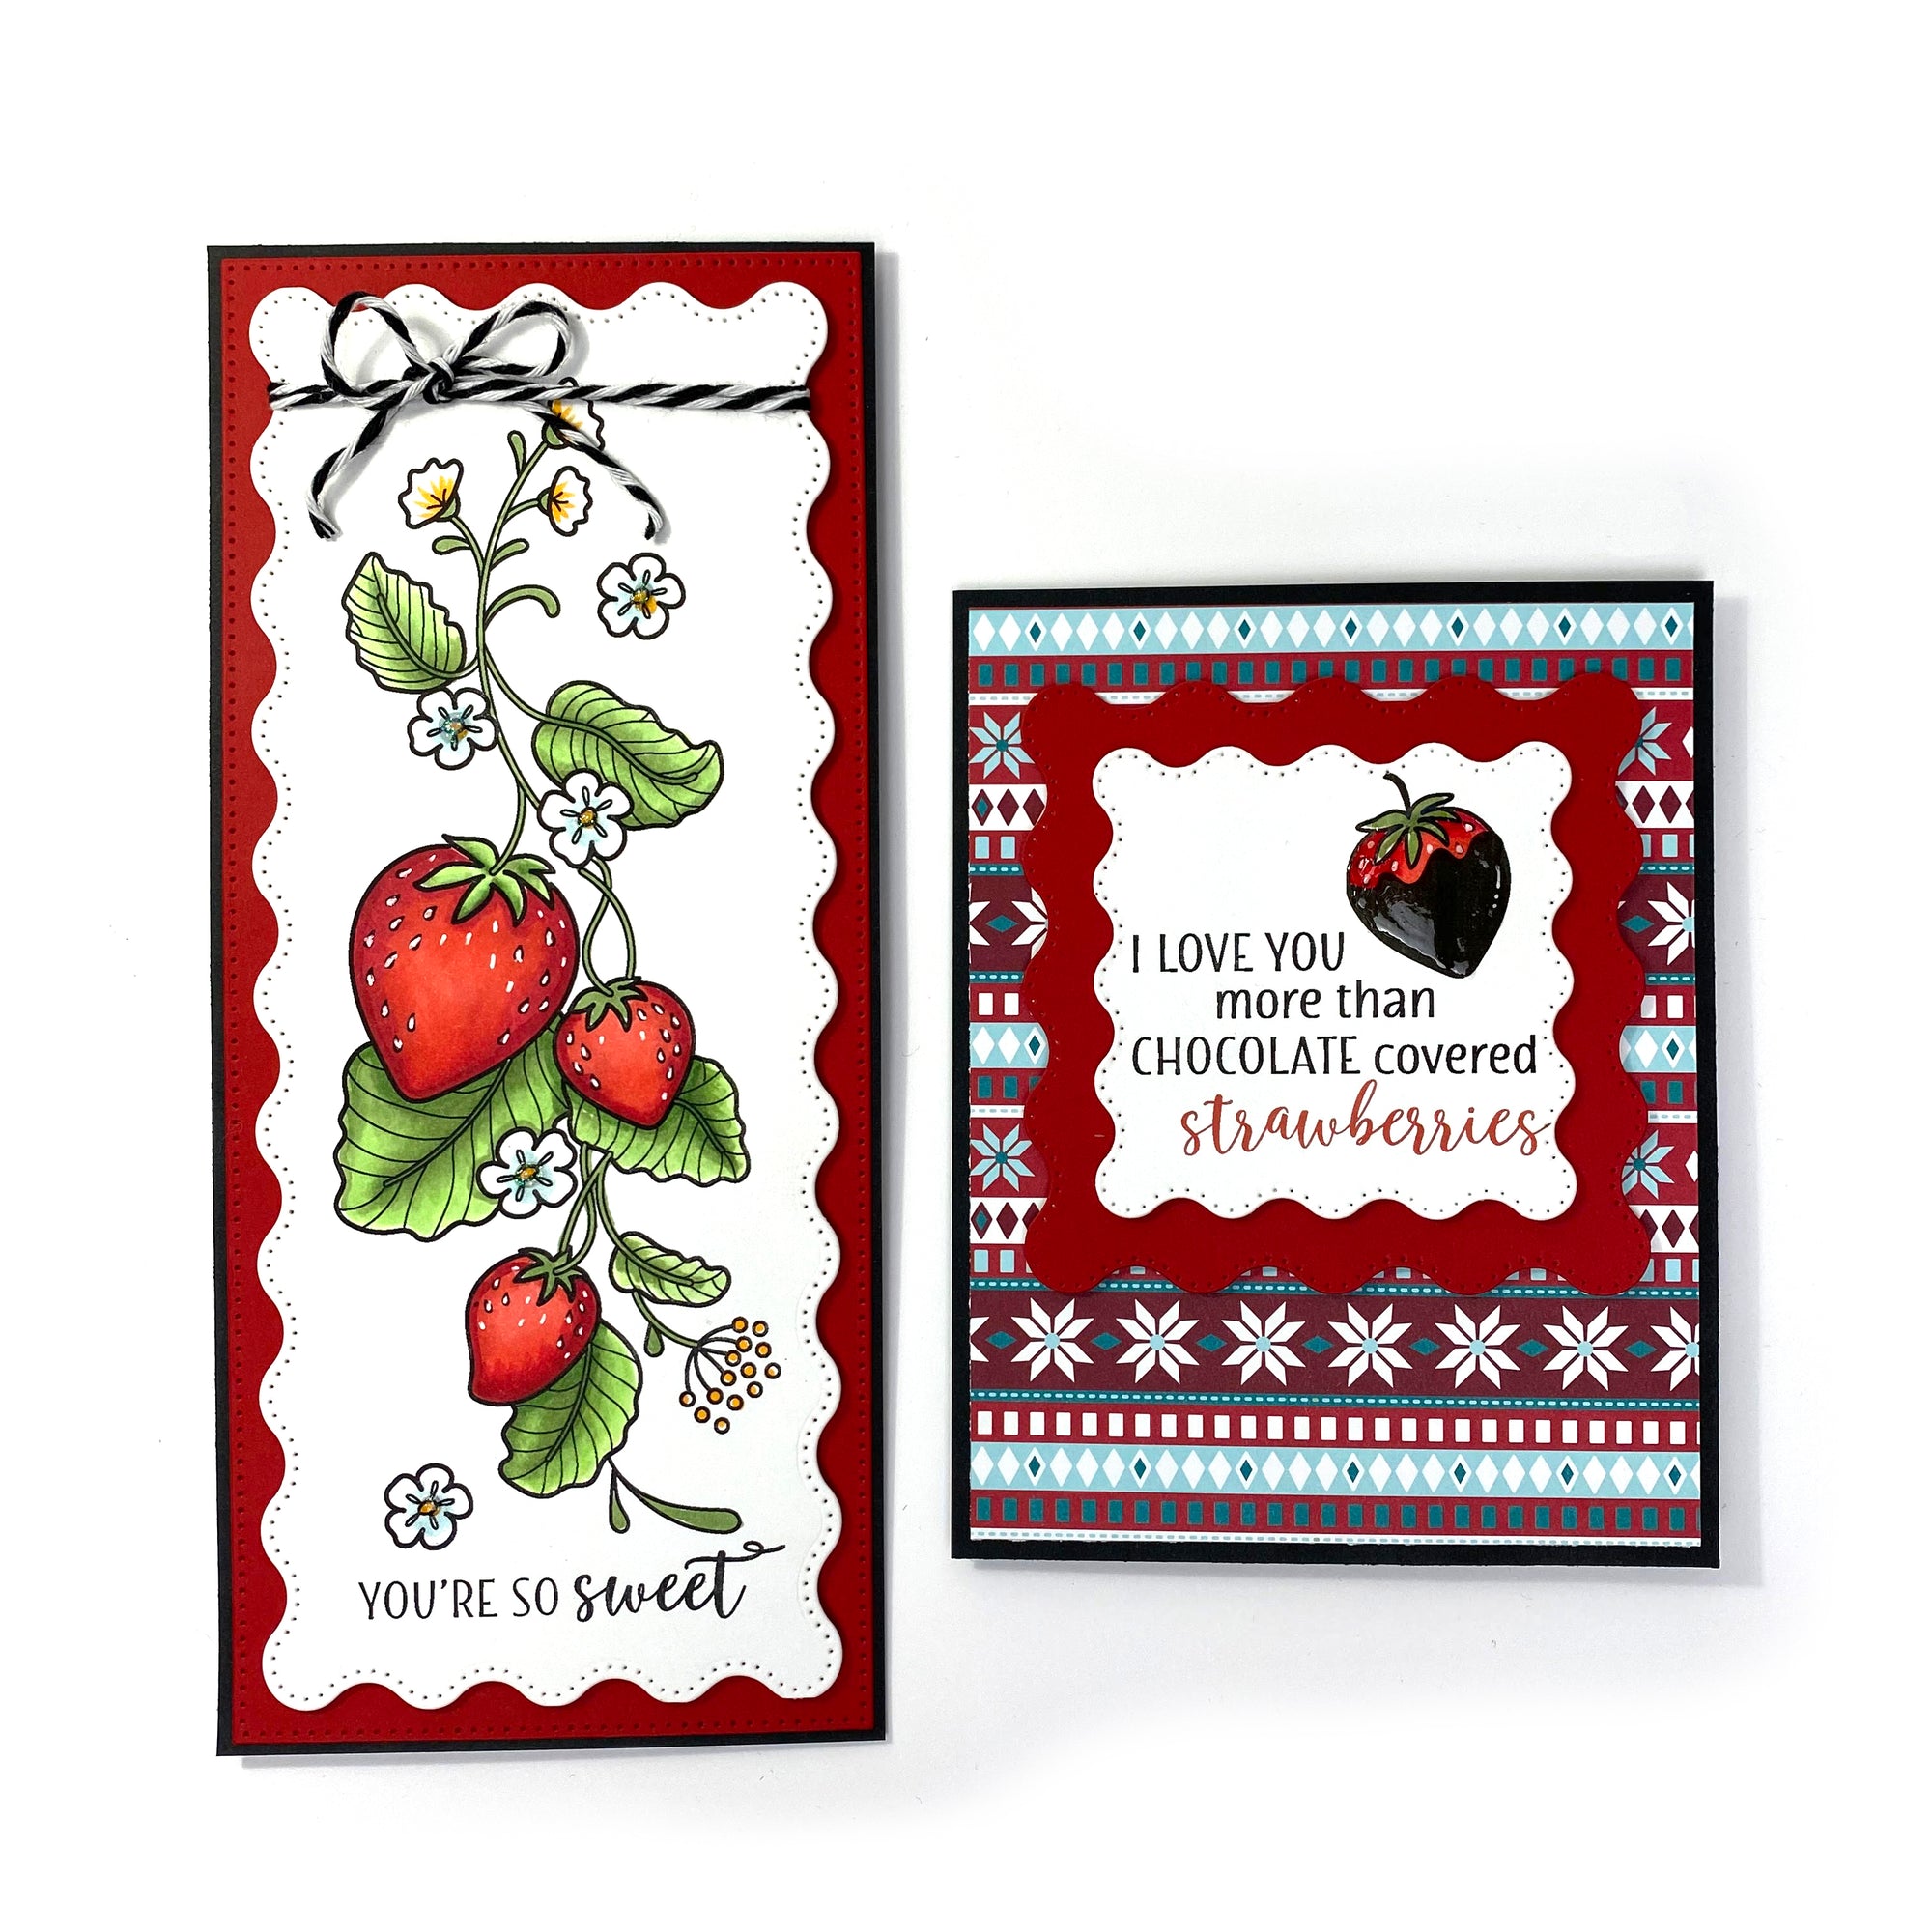 Two handmade card samples using the stamp and die, "Strawberry Vine" from Dare 2B Artzy.